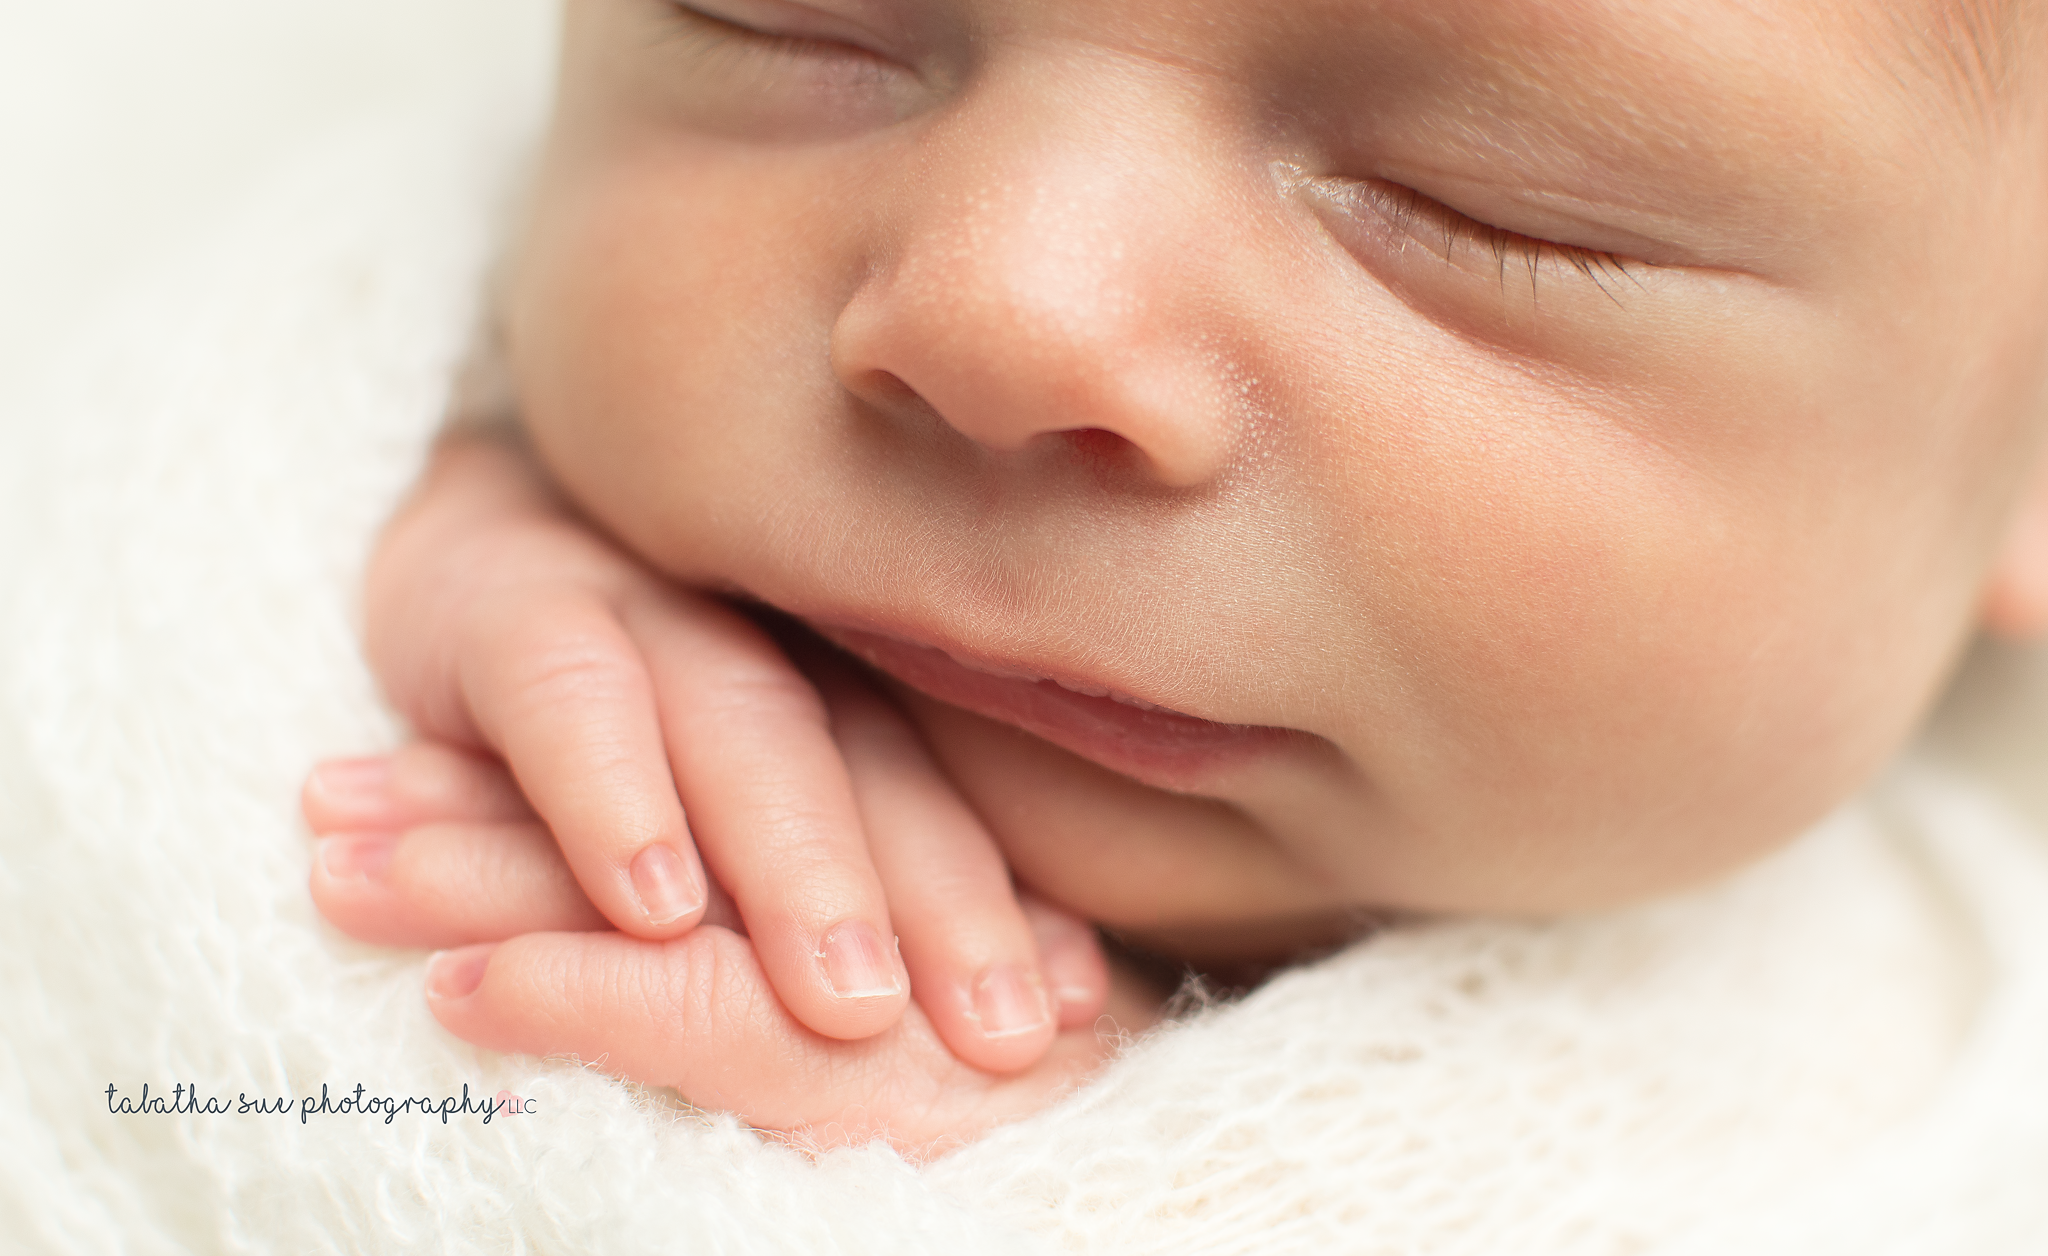 close-up-picture-of-newborn-baby-parma-ohio-44134.png